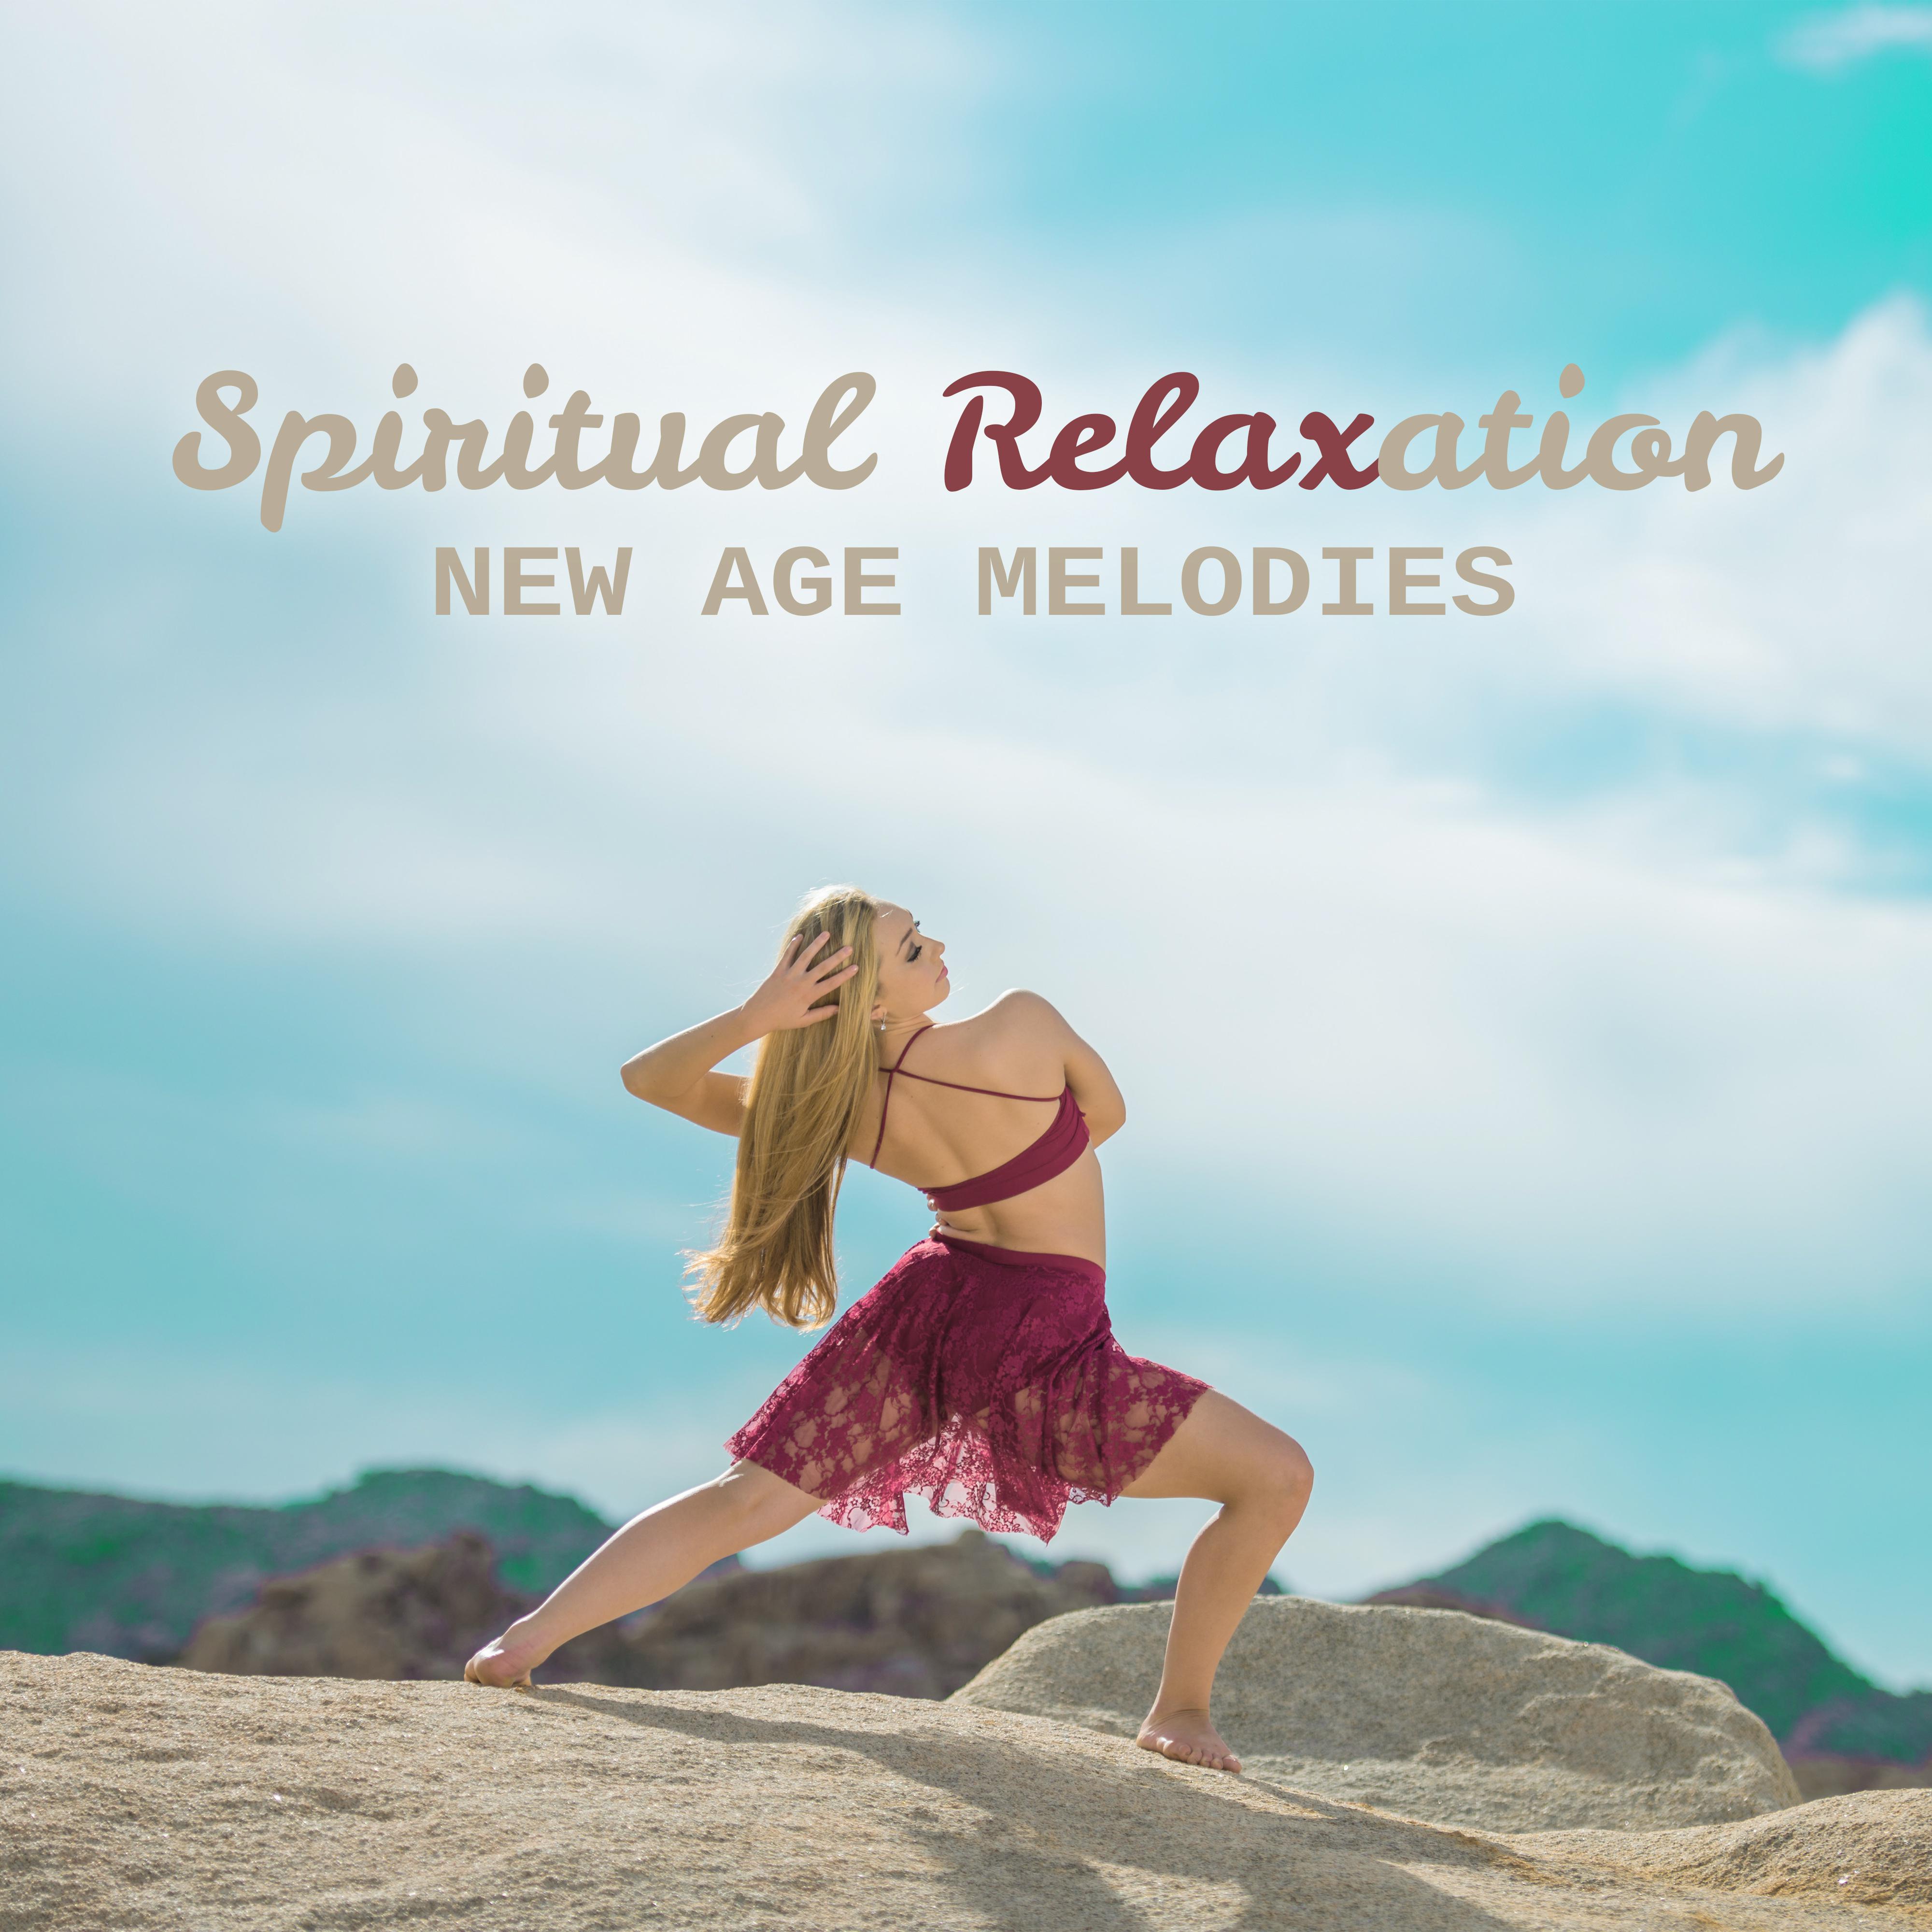 Spiritual Relaxation New Age Melodies